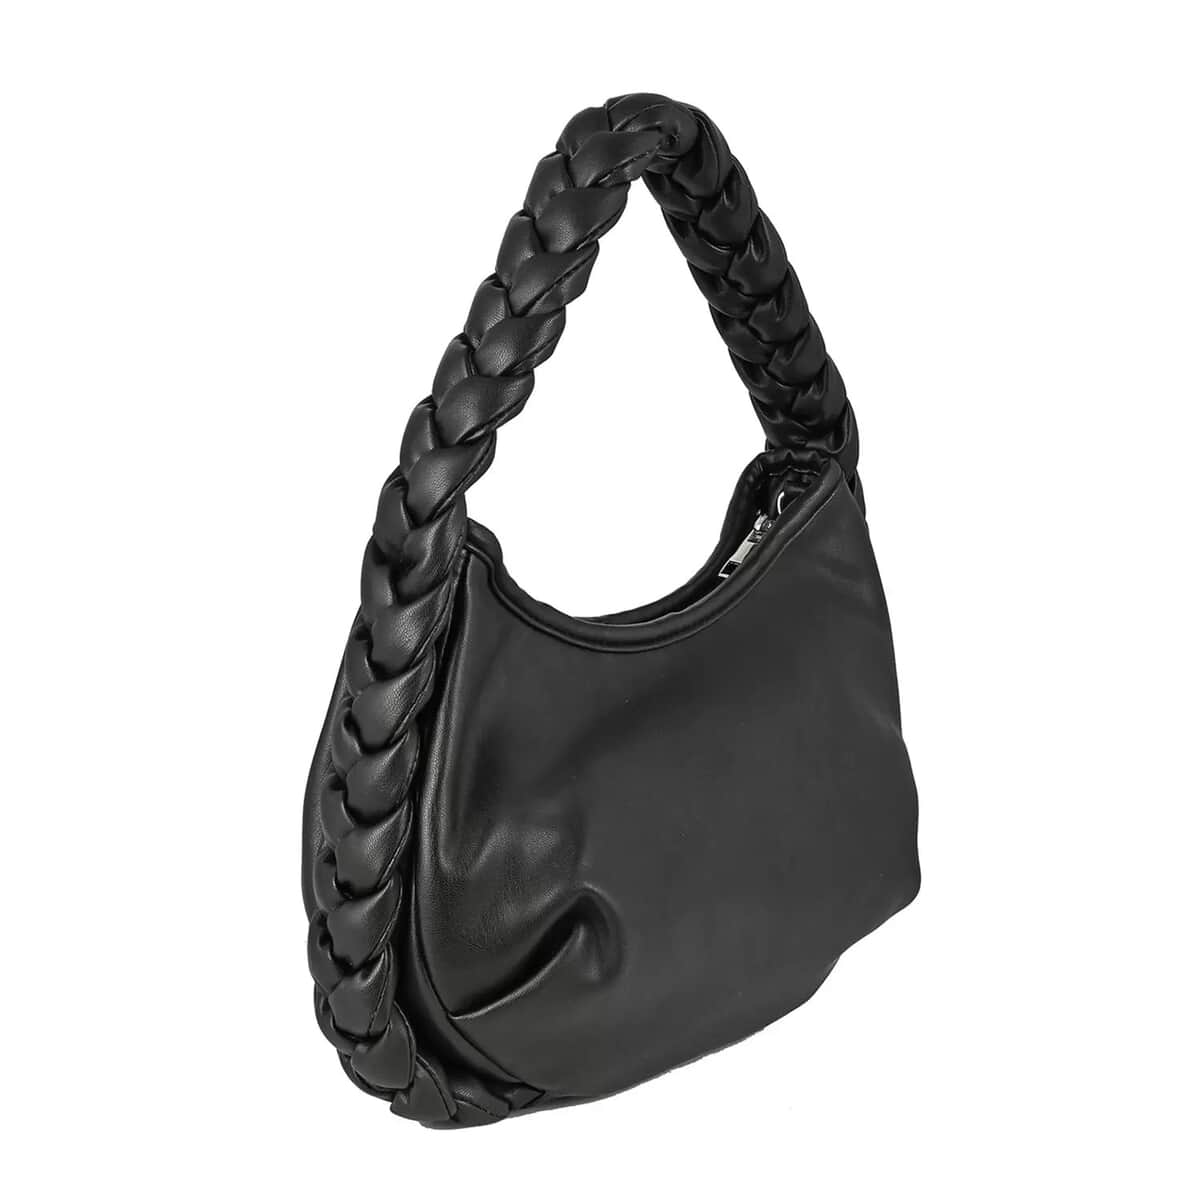 Designer Closeout Collection 18 Black Braided Handle Vegan Leather Hobo Bag (10x7.5x2.3”) with Adjustable Long Strap (51”) image number 5